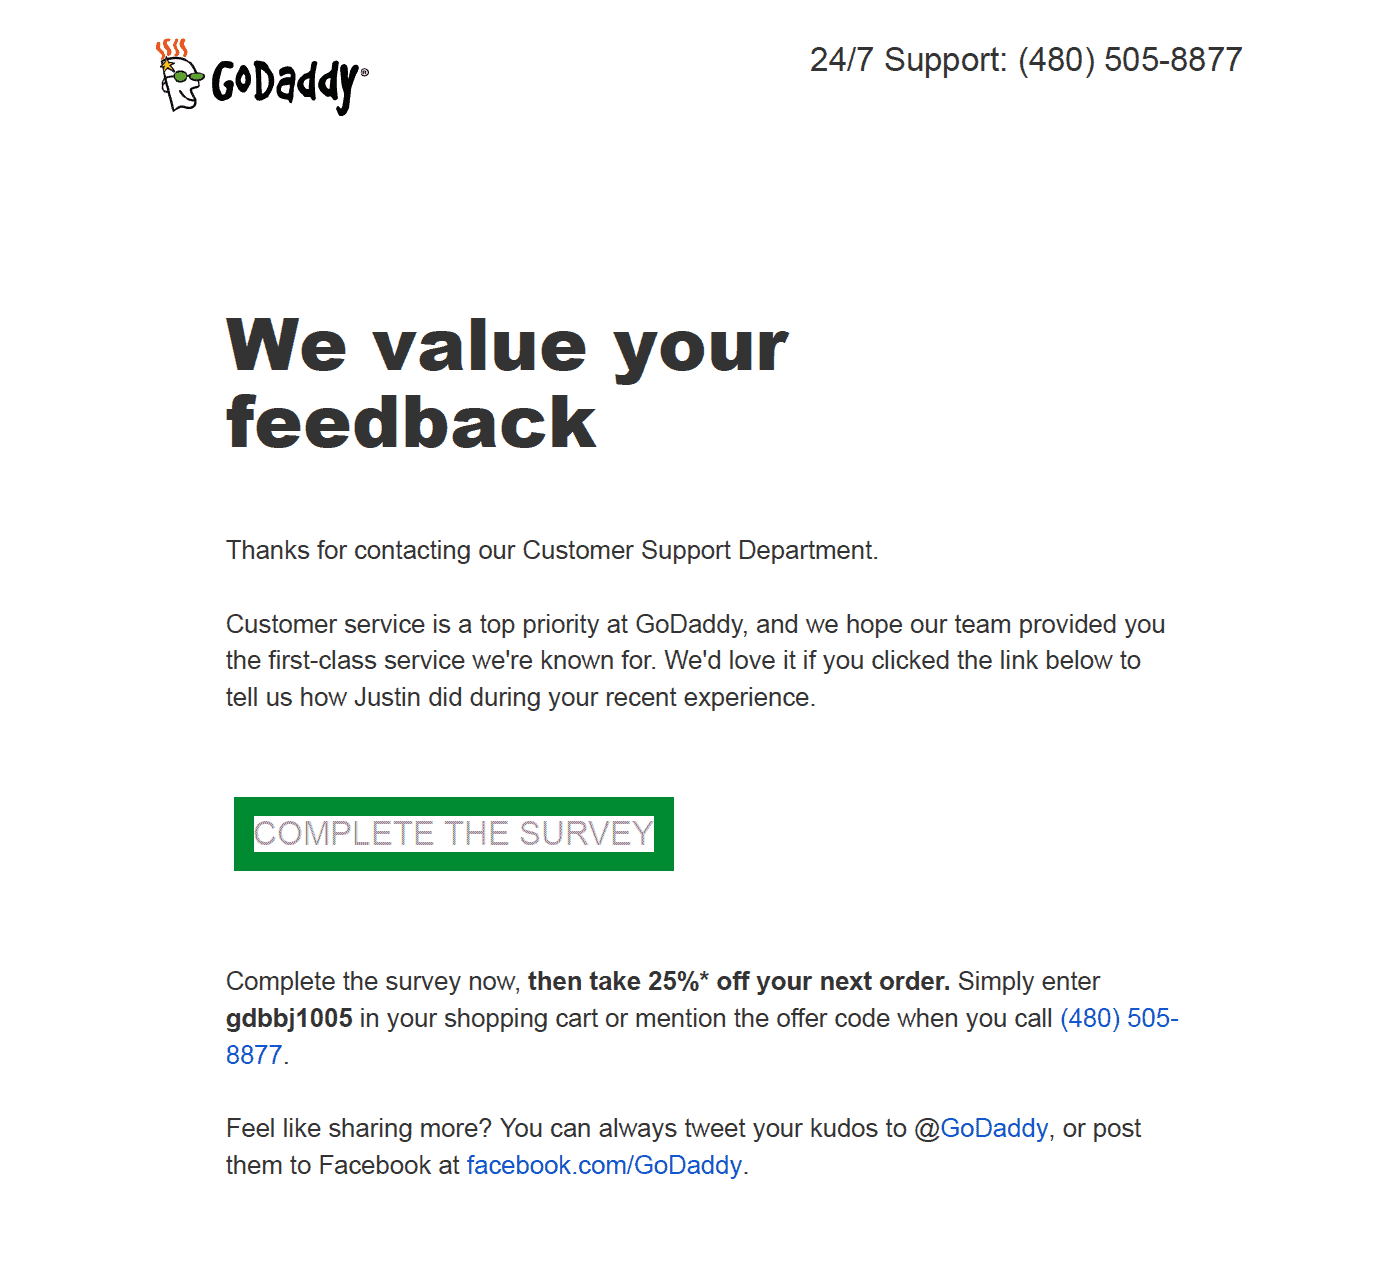 upsell email from GoDaddy